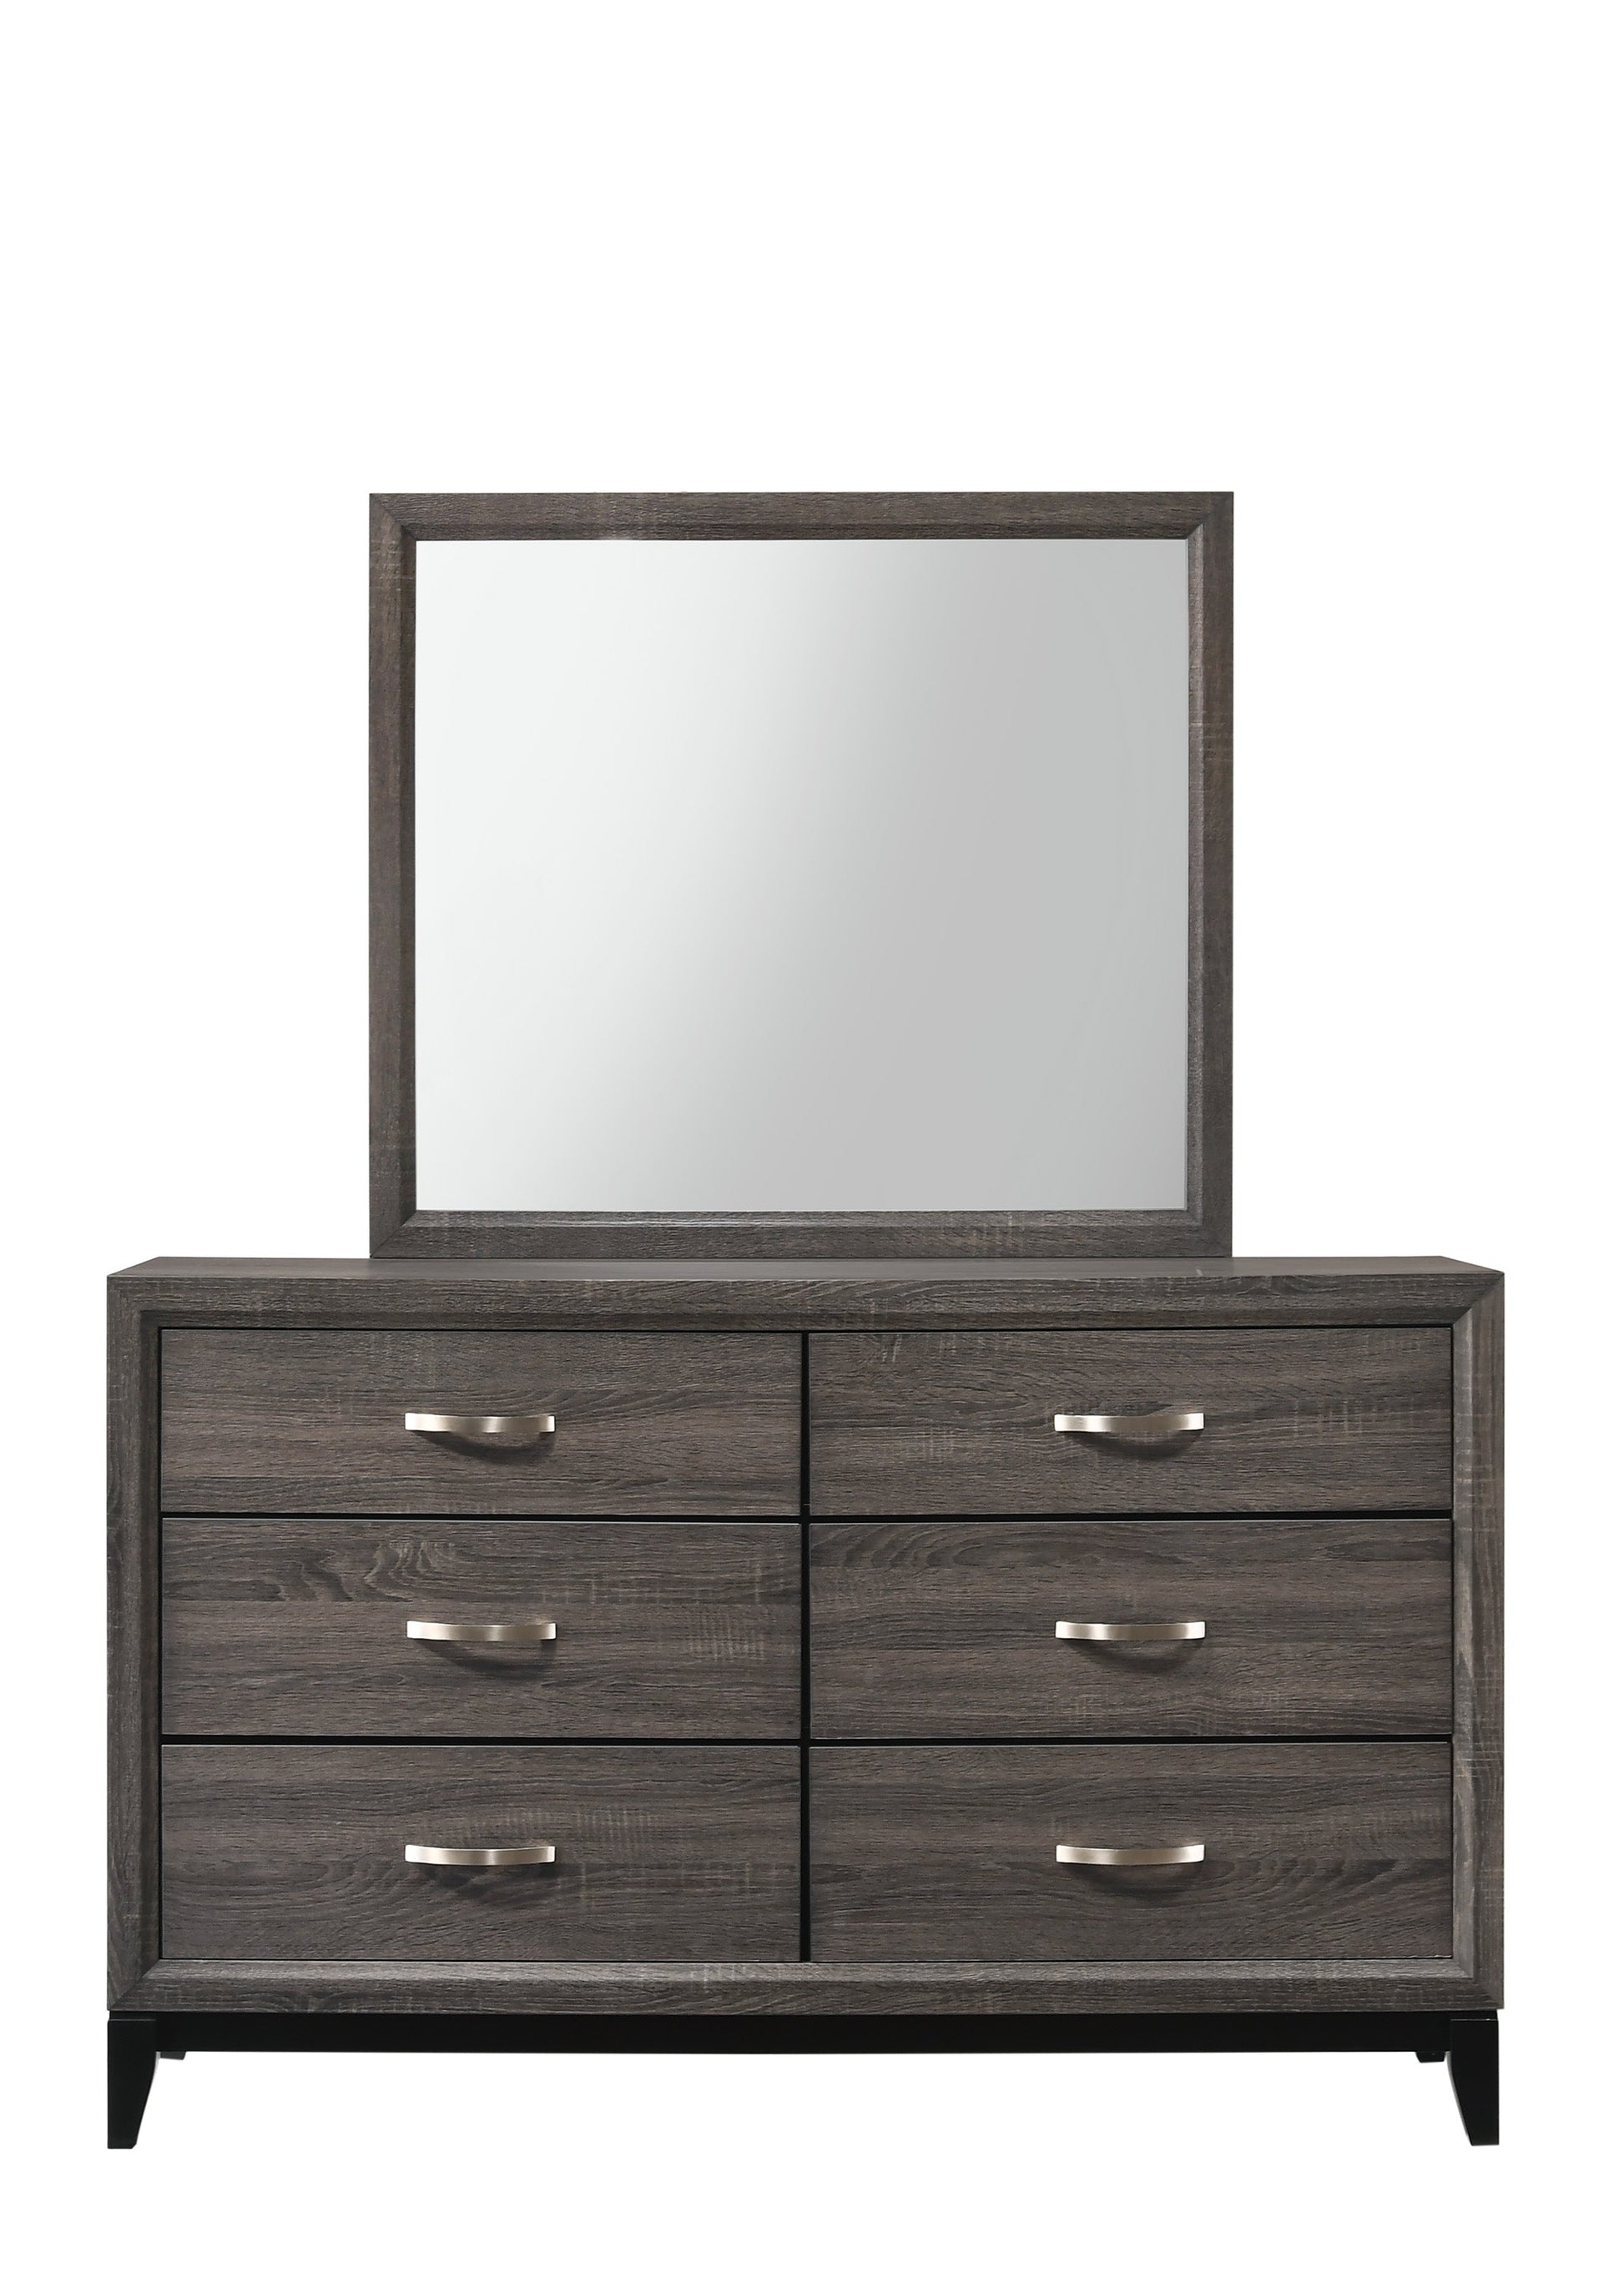 Akerson Gray Finish Wood Modern Rustic And Charm Panel Bedroom Set